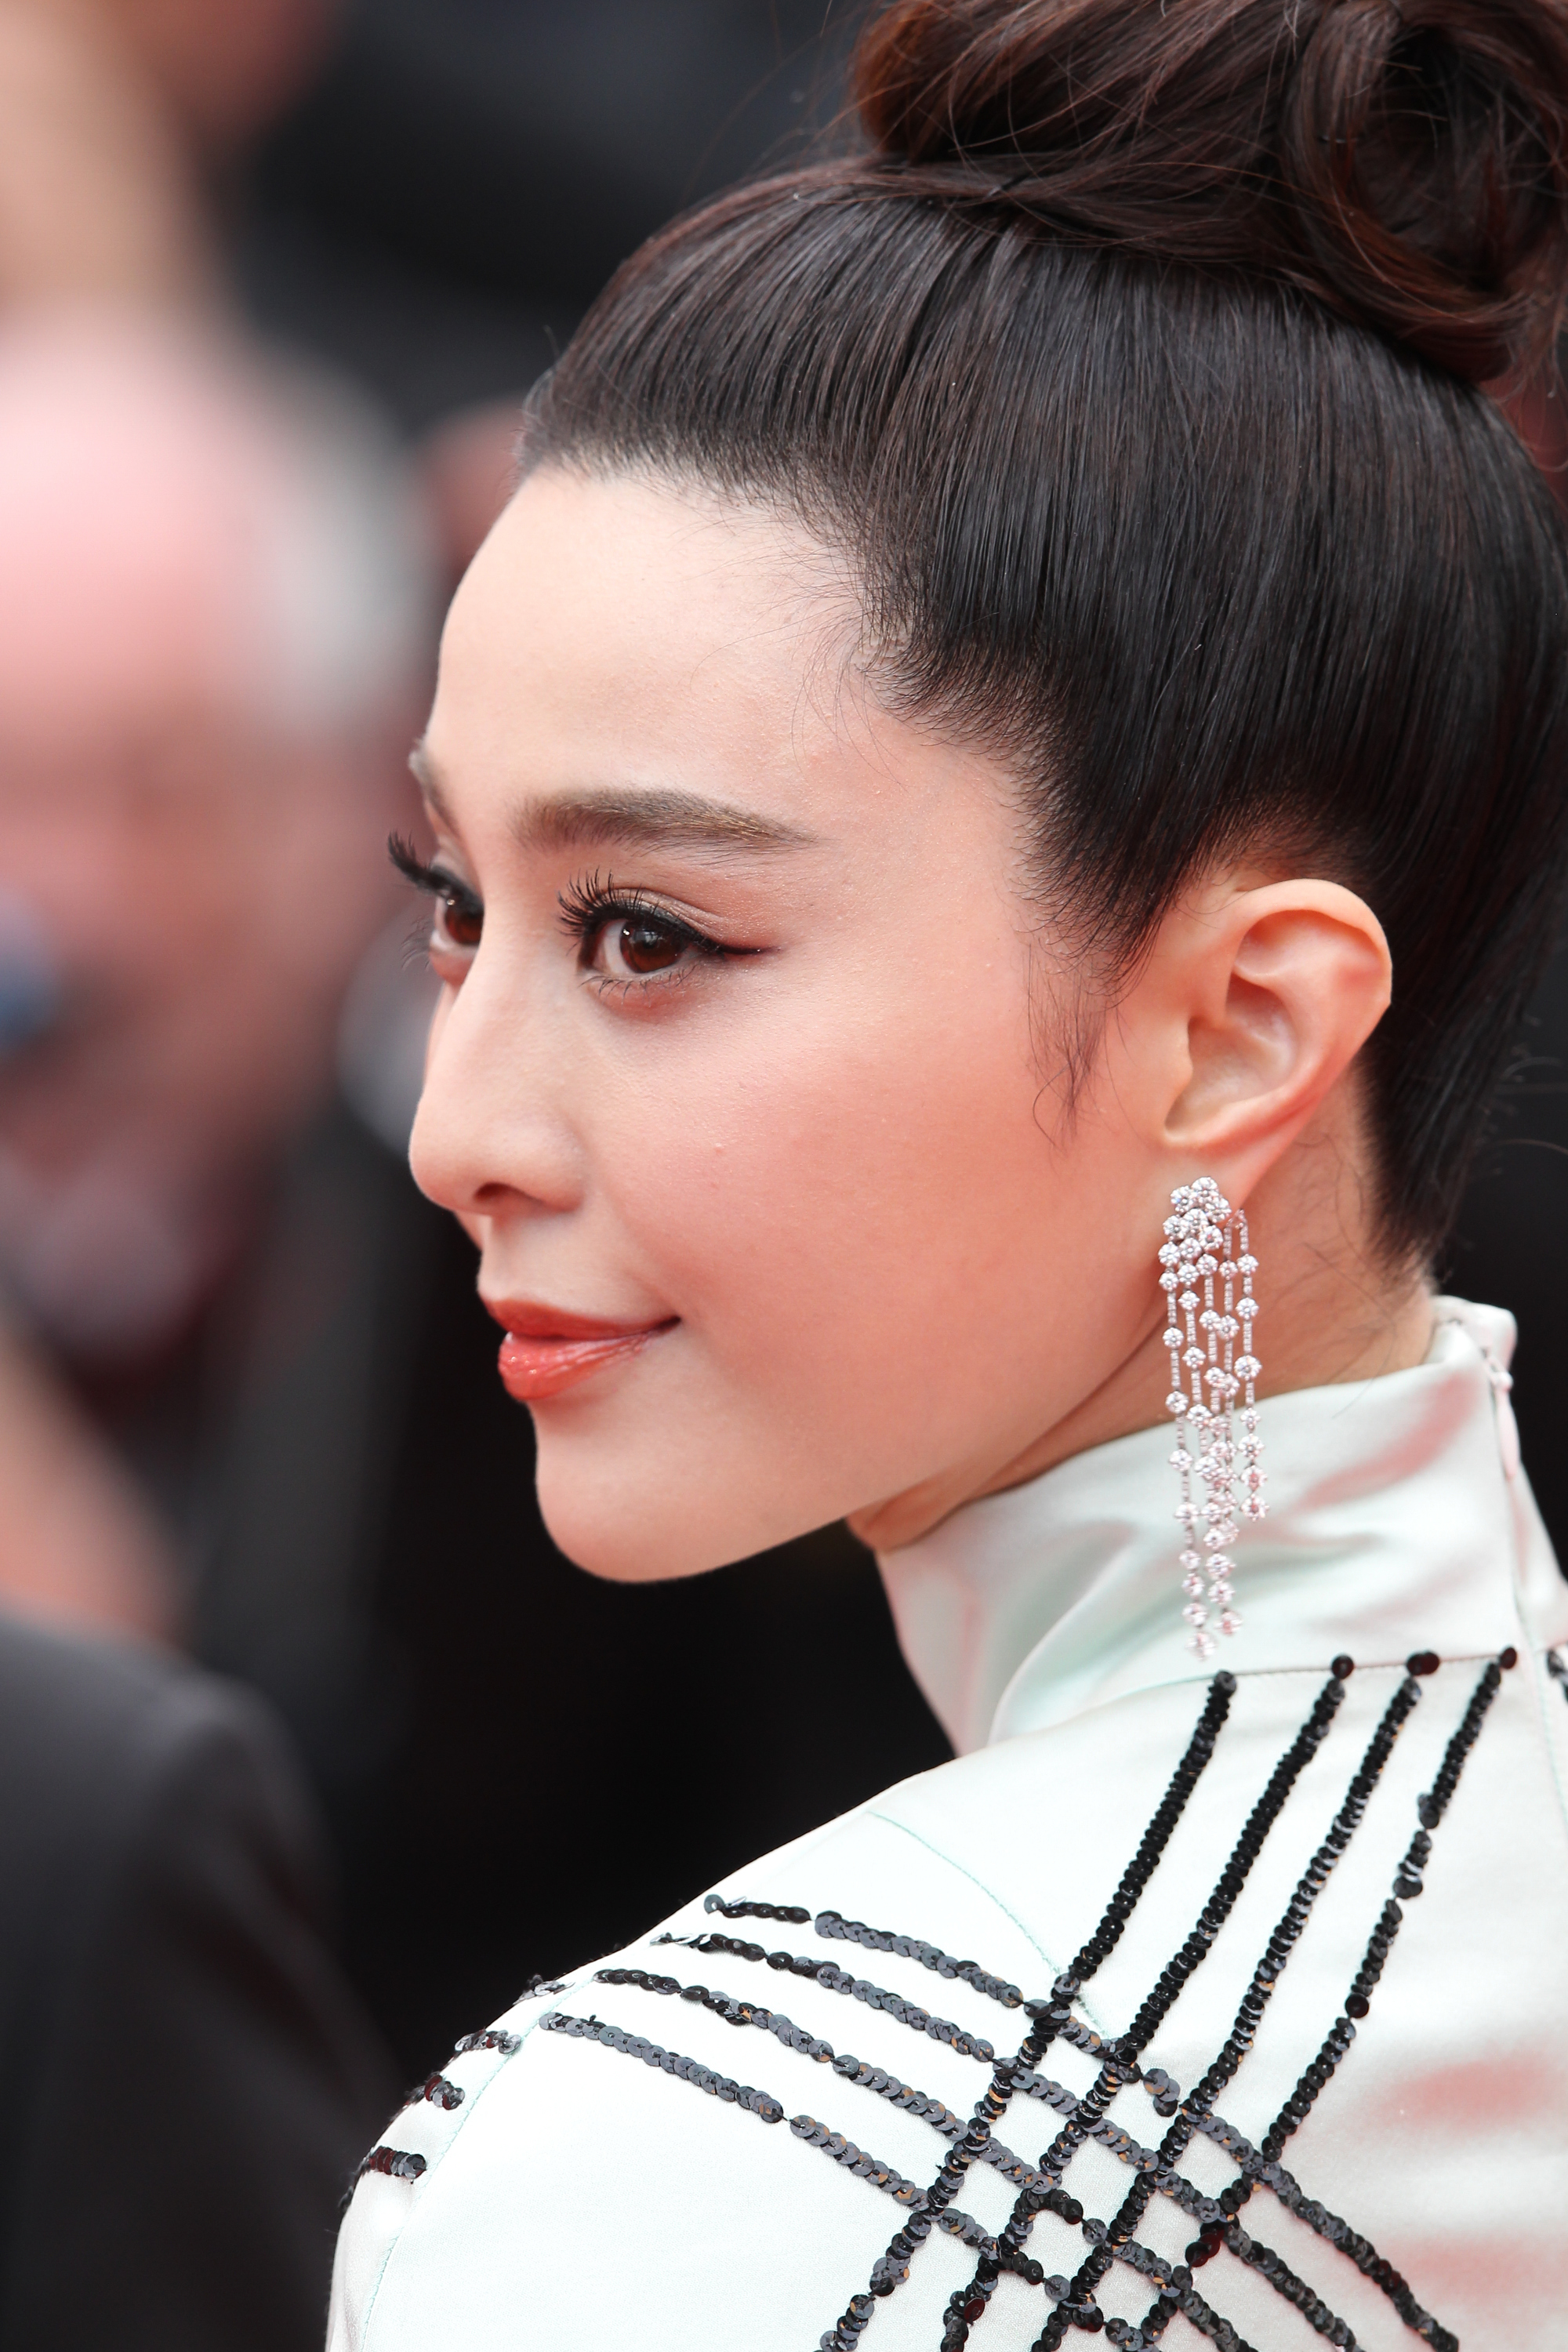 Fan is one China's most famous actresses of all time (photo: Shutterstock)